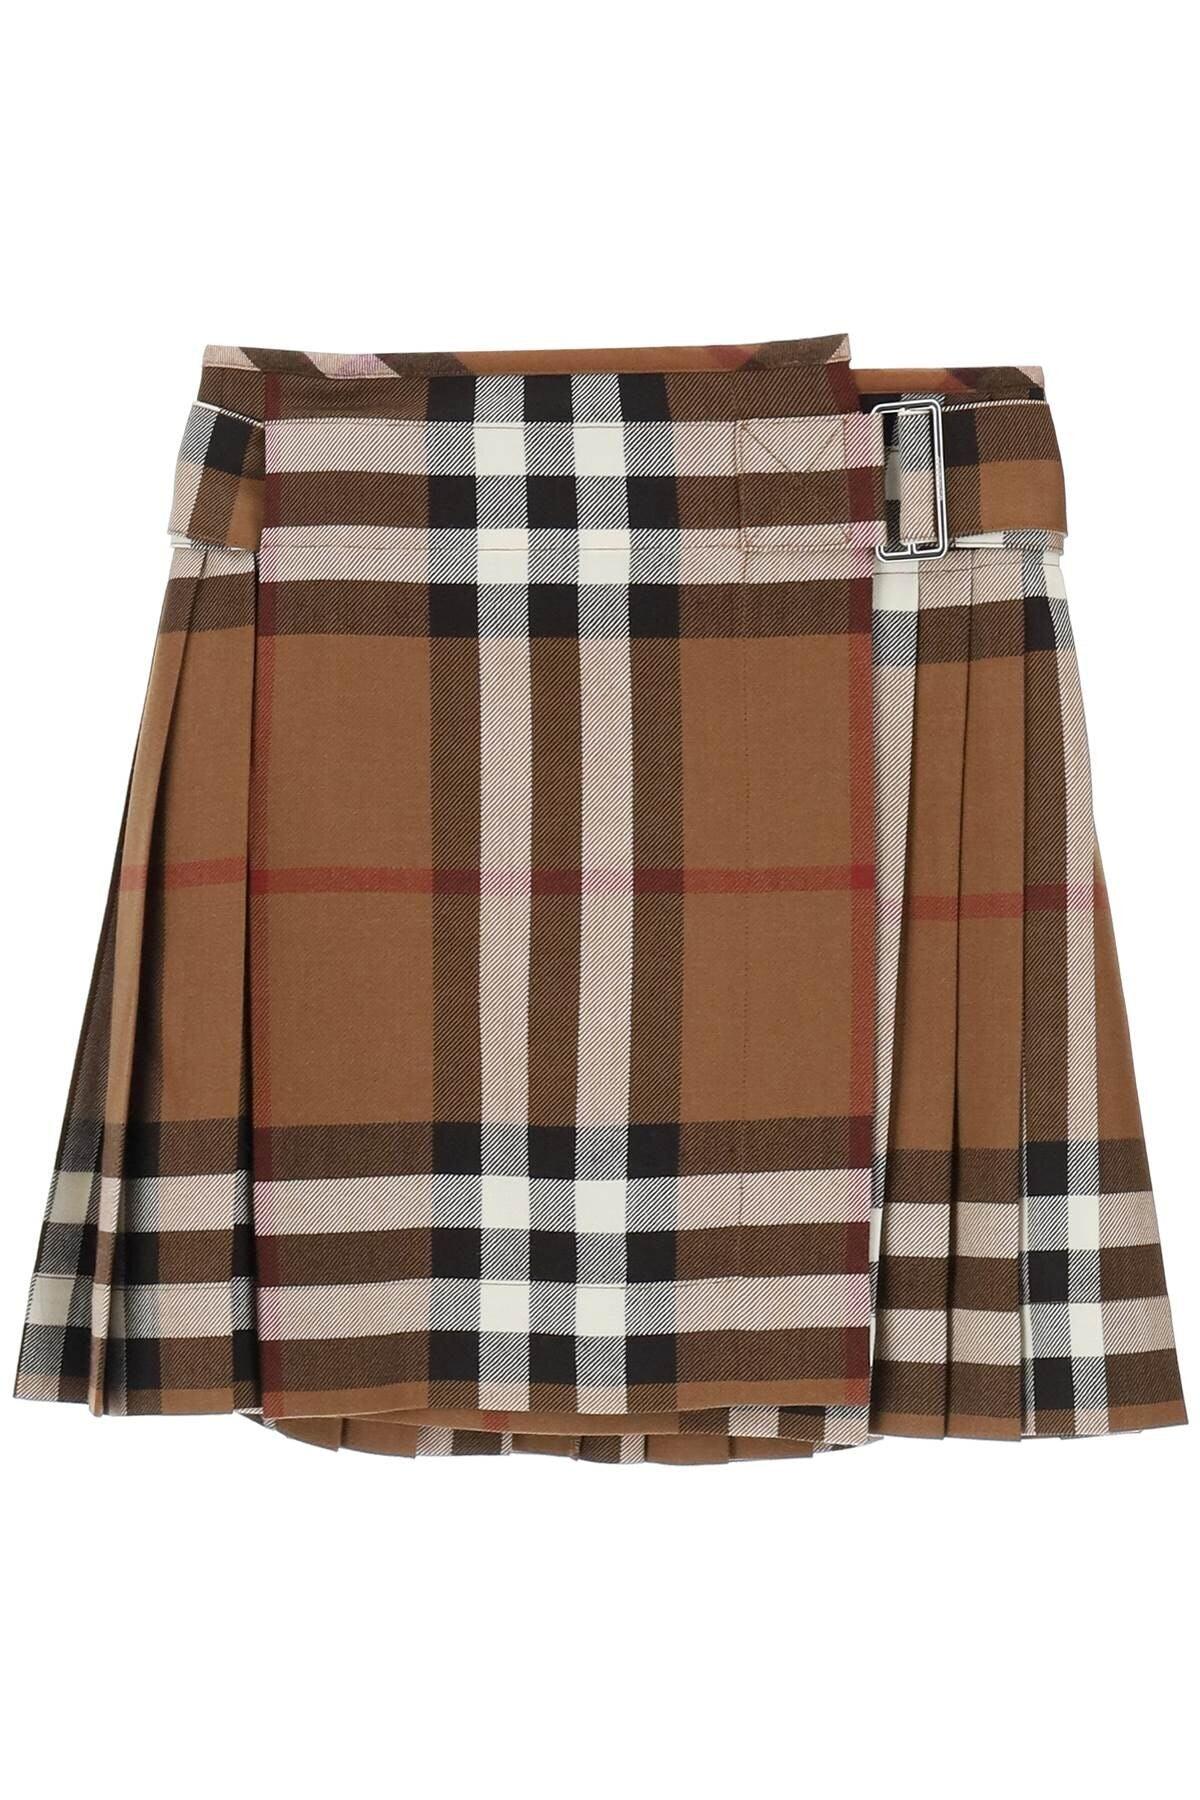 Burberry exaggerated Check Pleated Wool Mini Skirt in Brown | Lyst